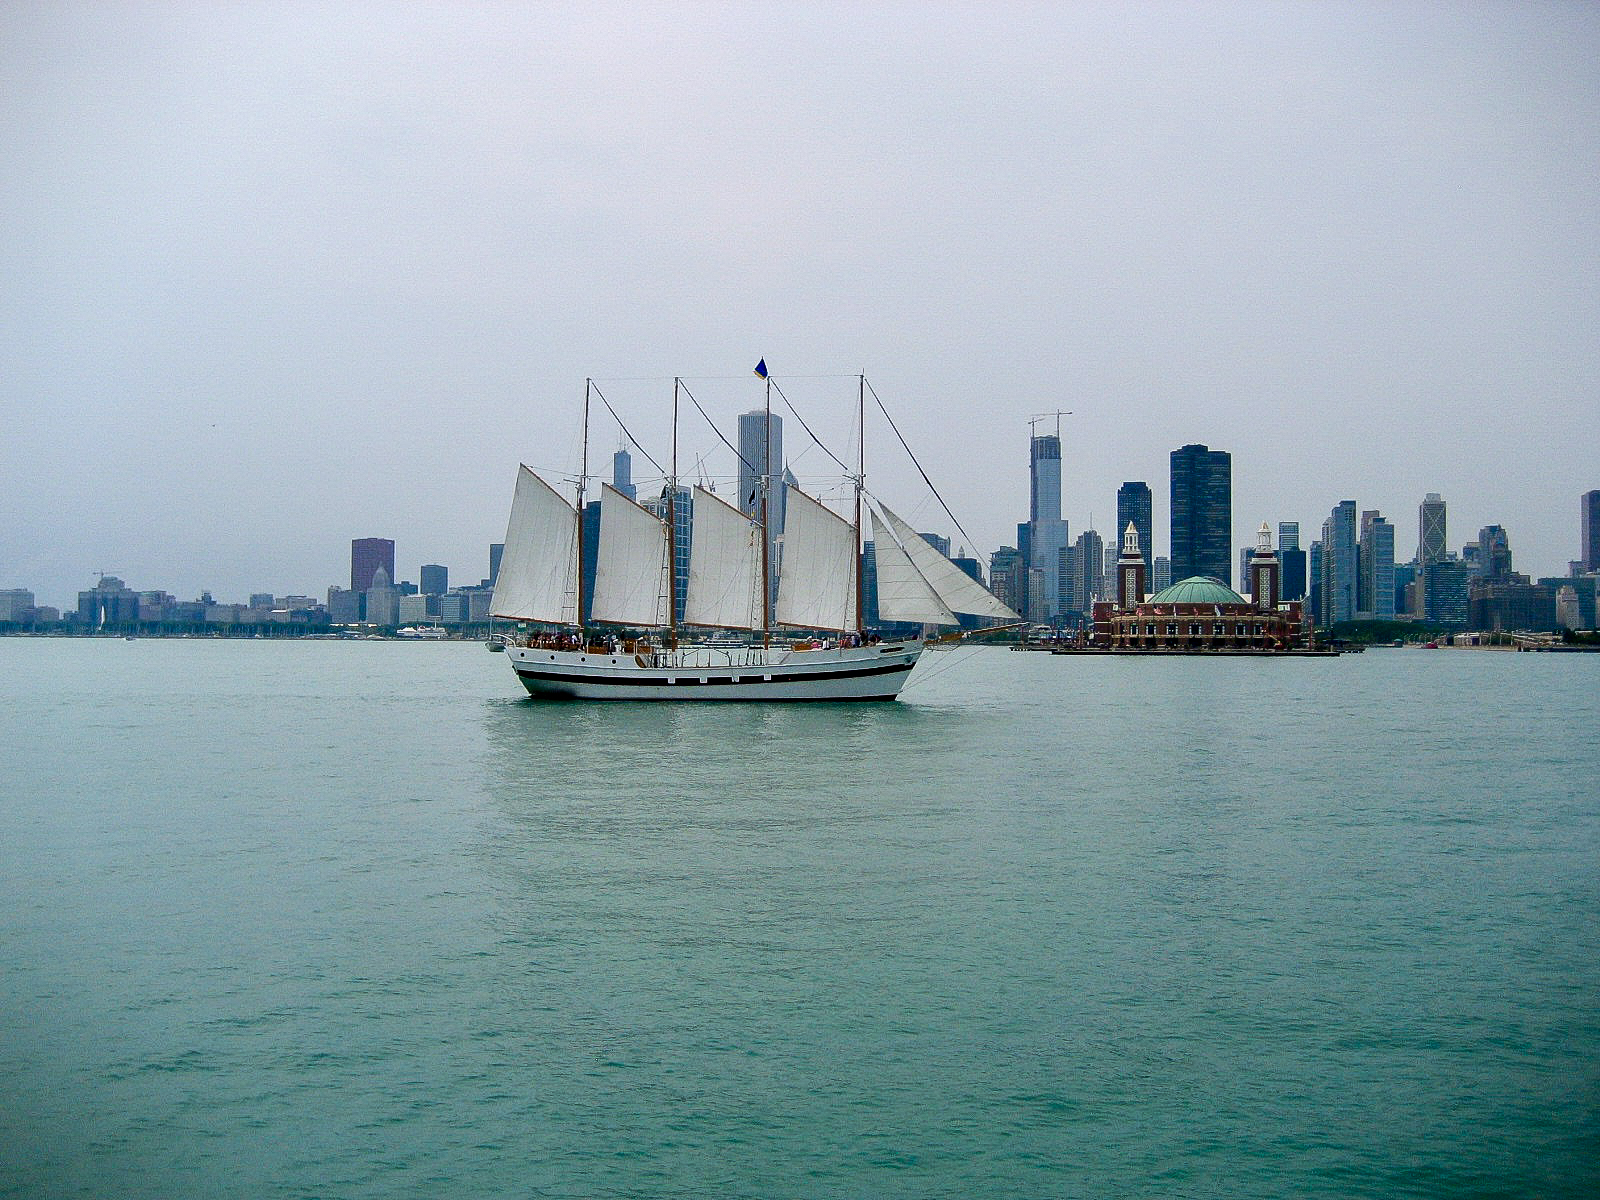 The Windy Ship in Chicago